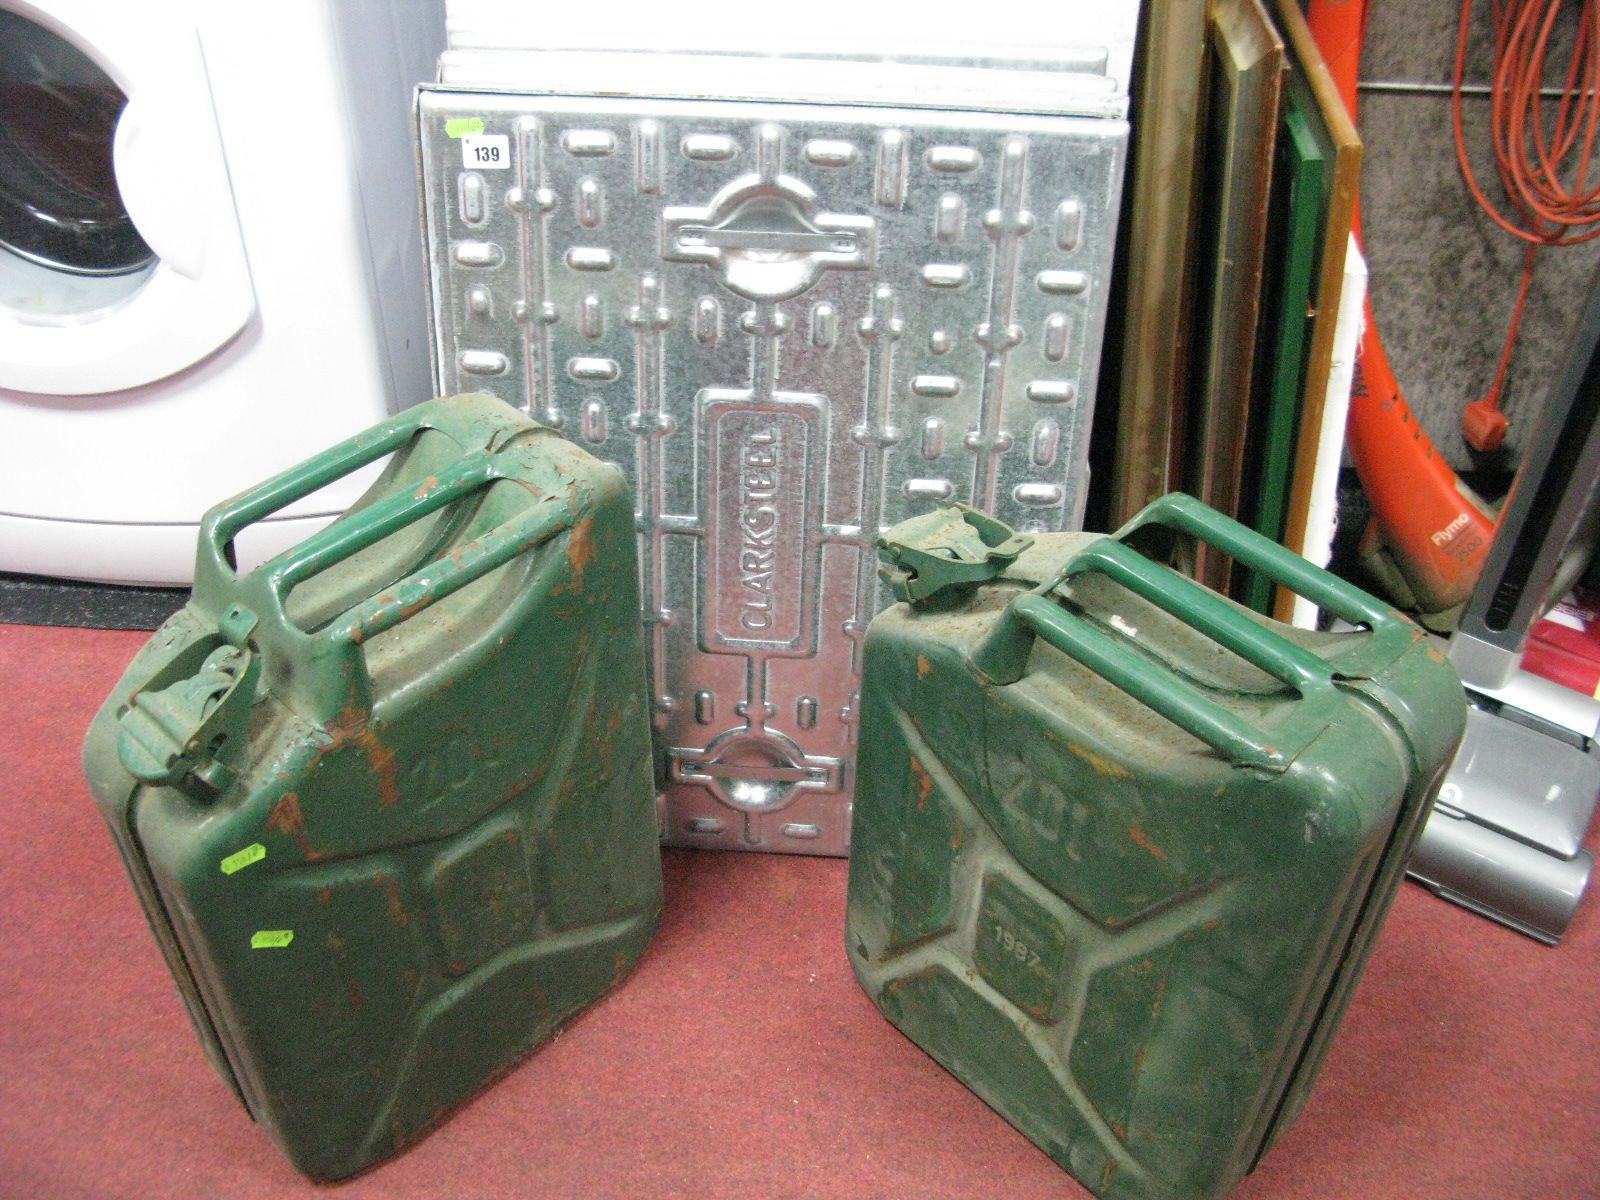 Two 20 Litre Petrol Cans, moulded '1987' (2), seven 'Clarksteel' drain covers. (9)